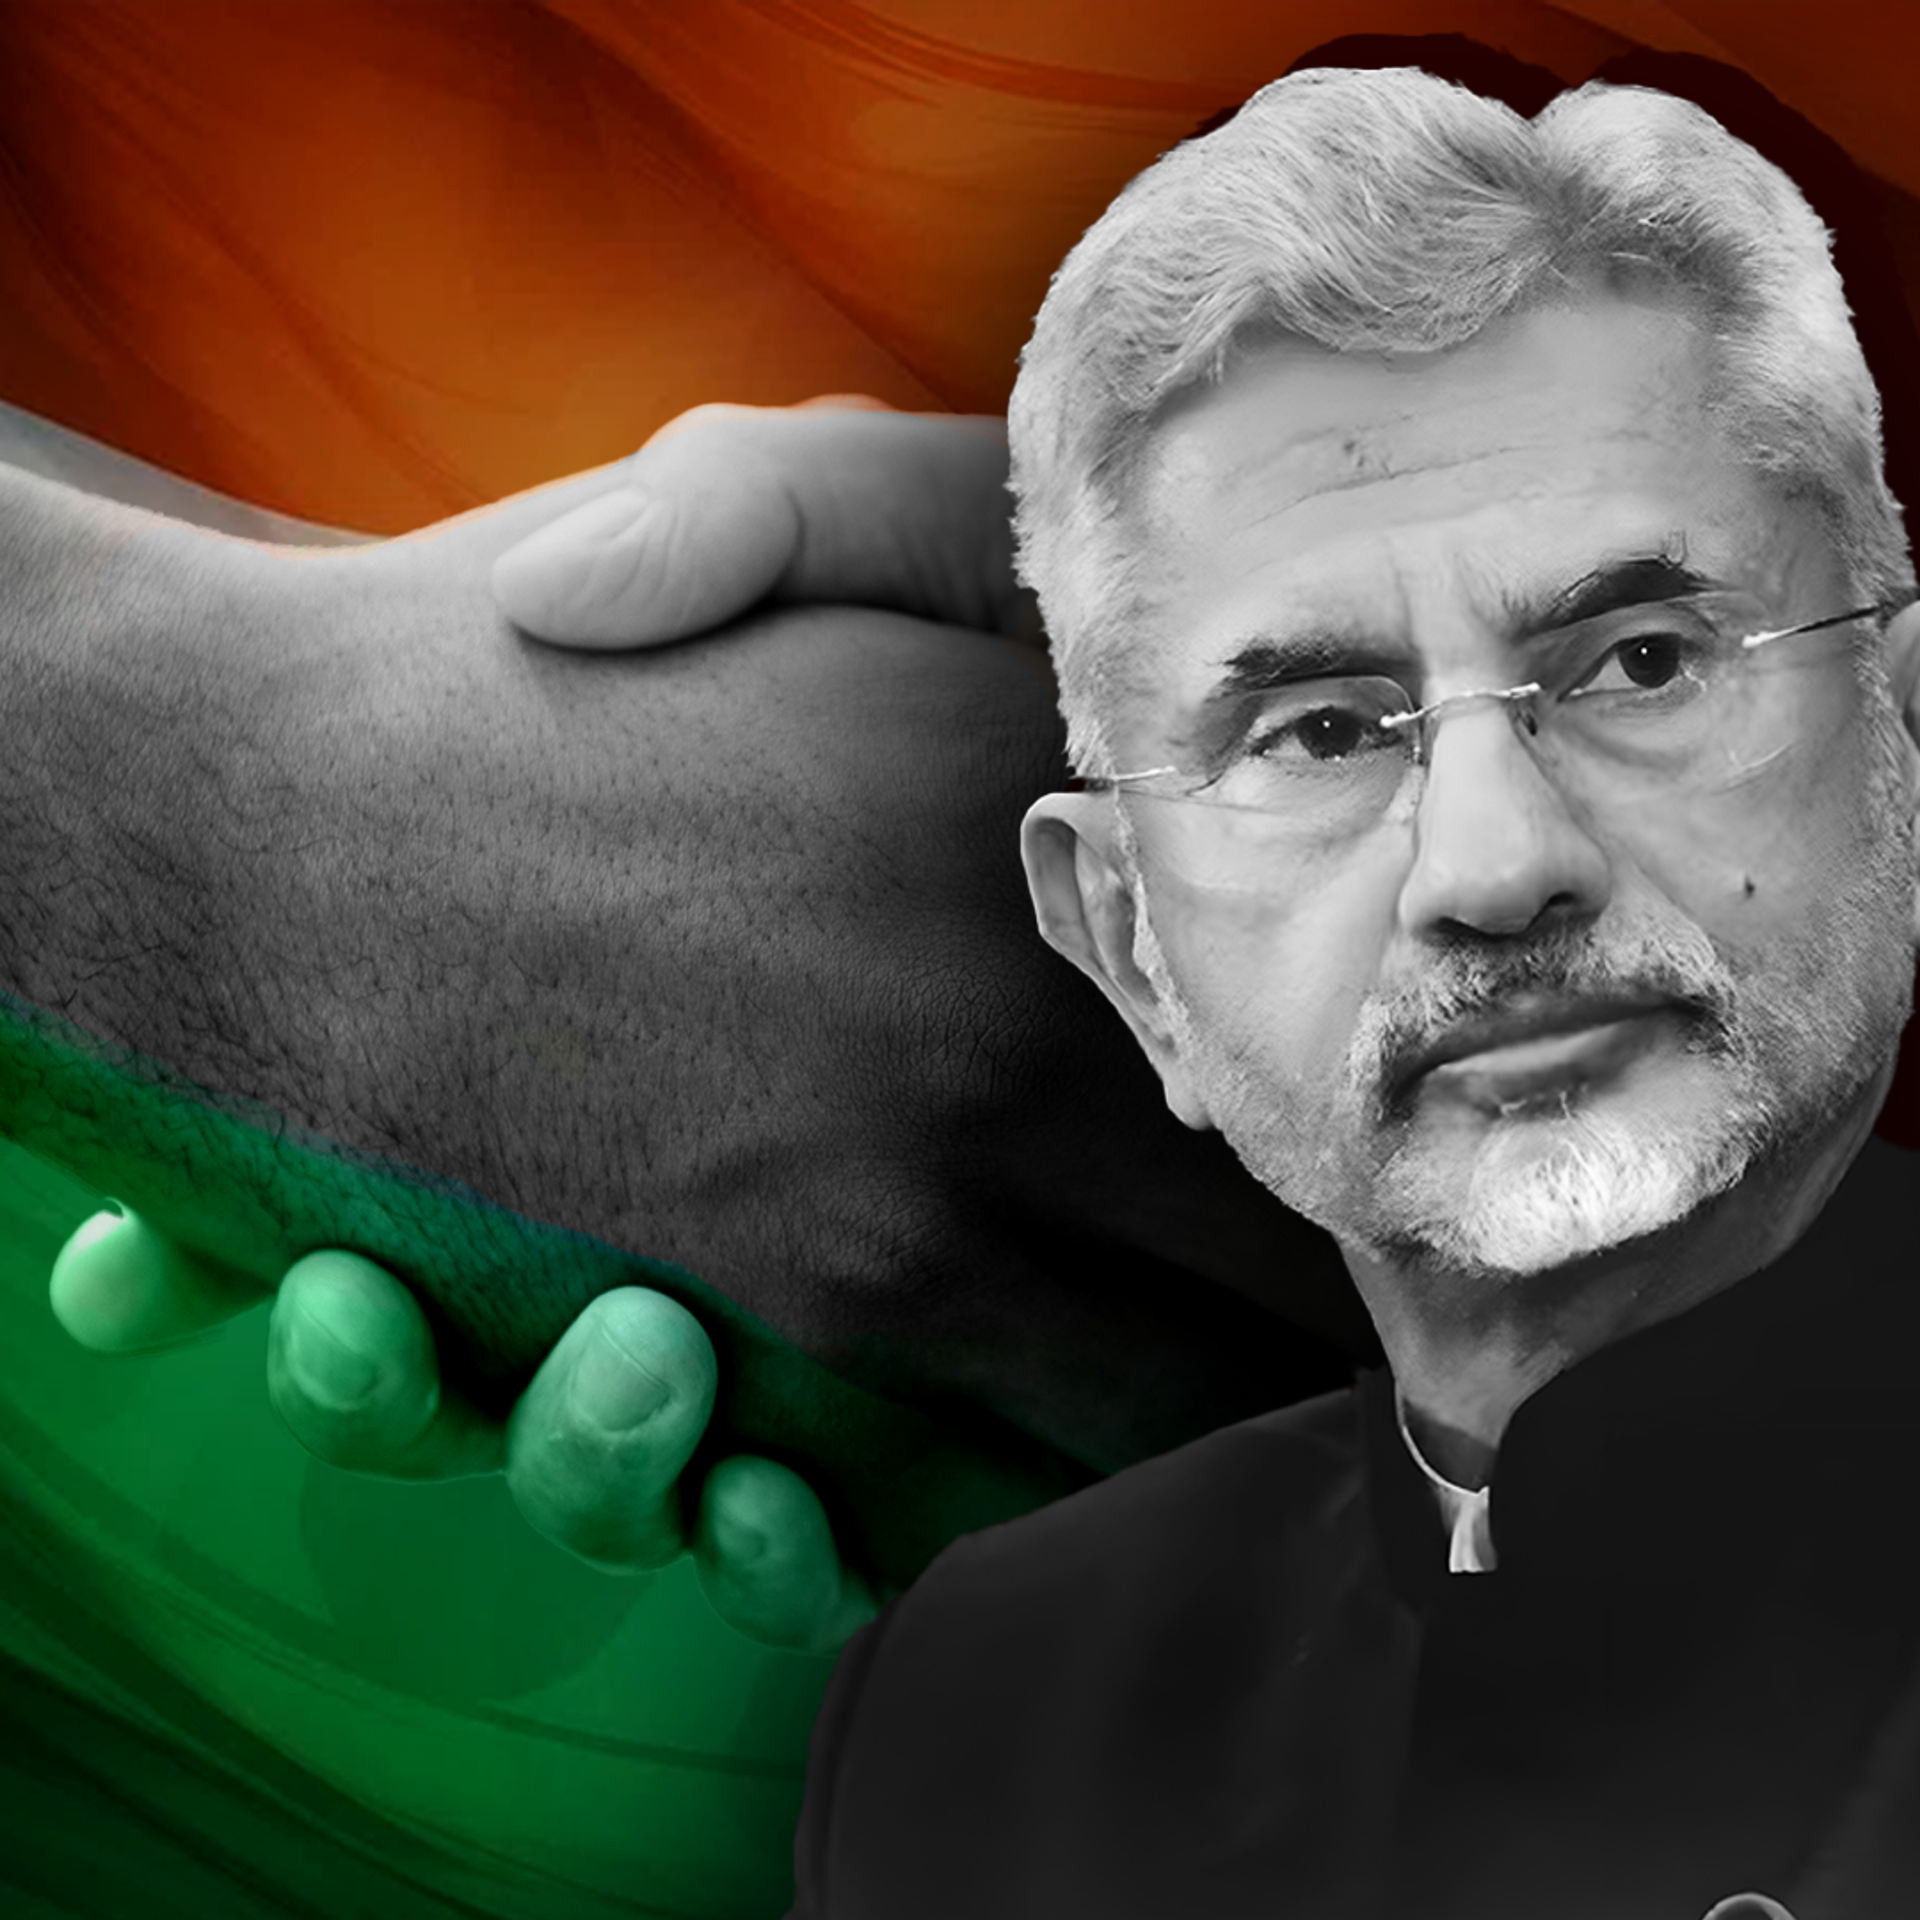 Every Indian should care about foreign policy: S Jaishankar